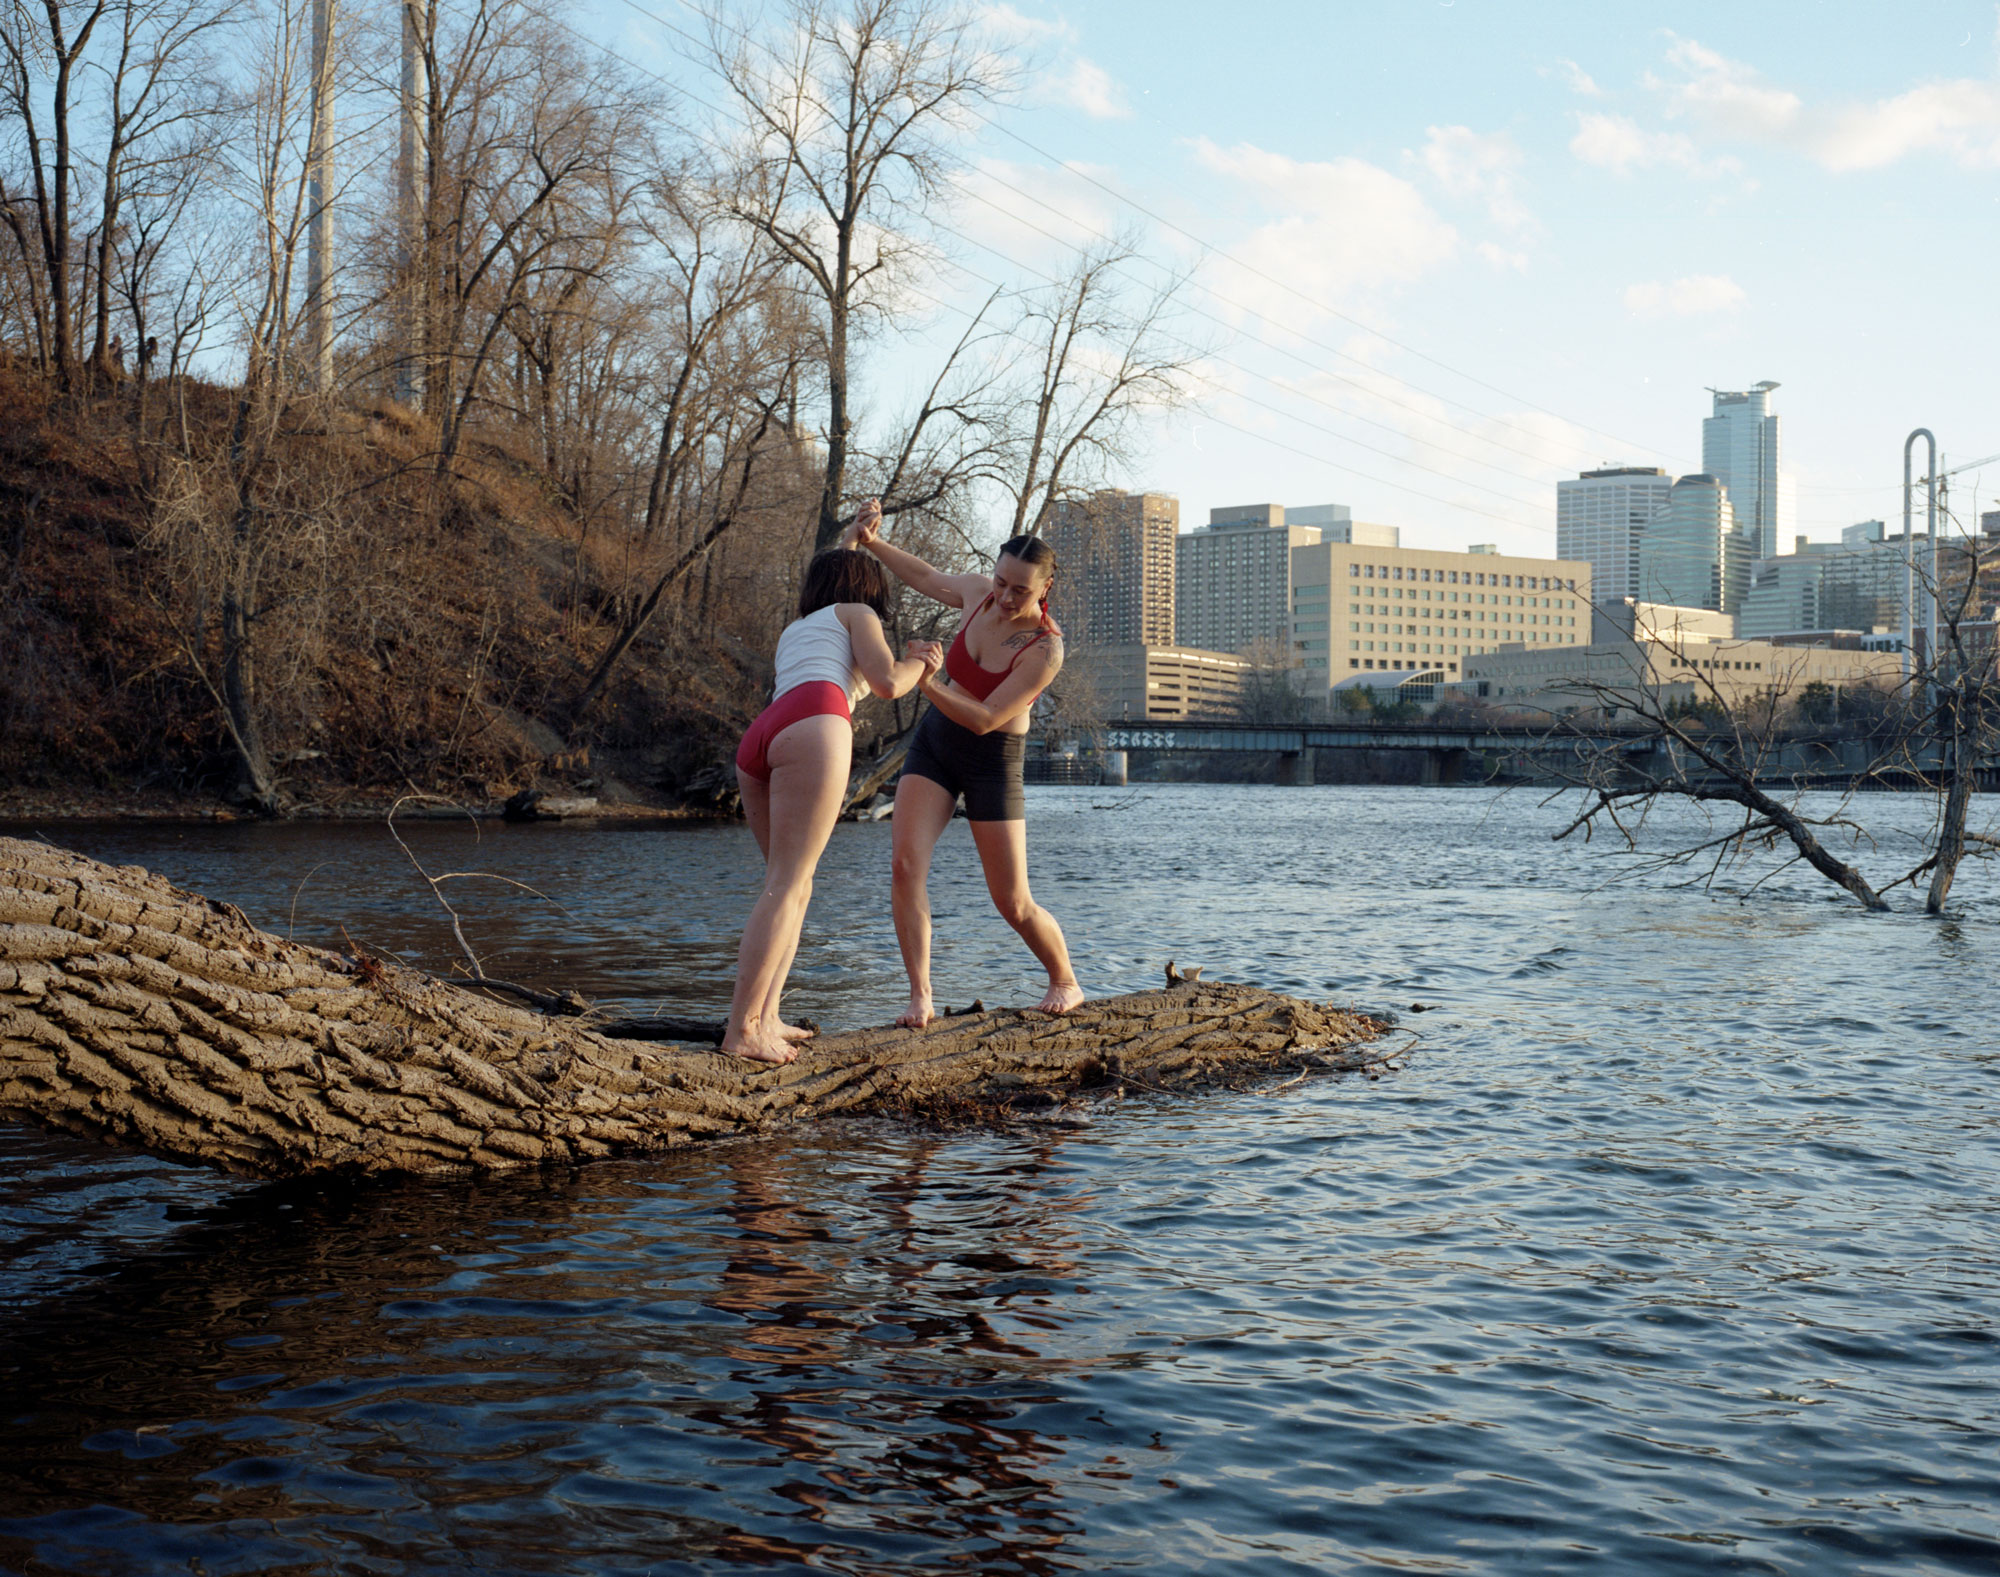 Two young adults on a log over a lake, playfully wrestling